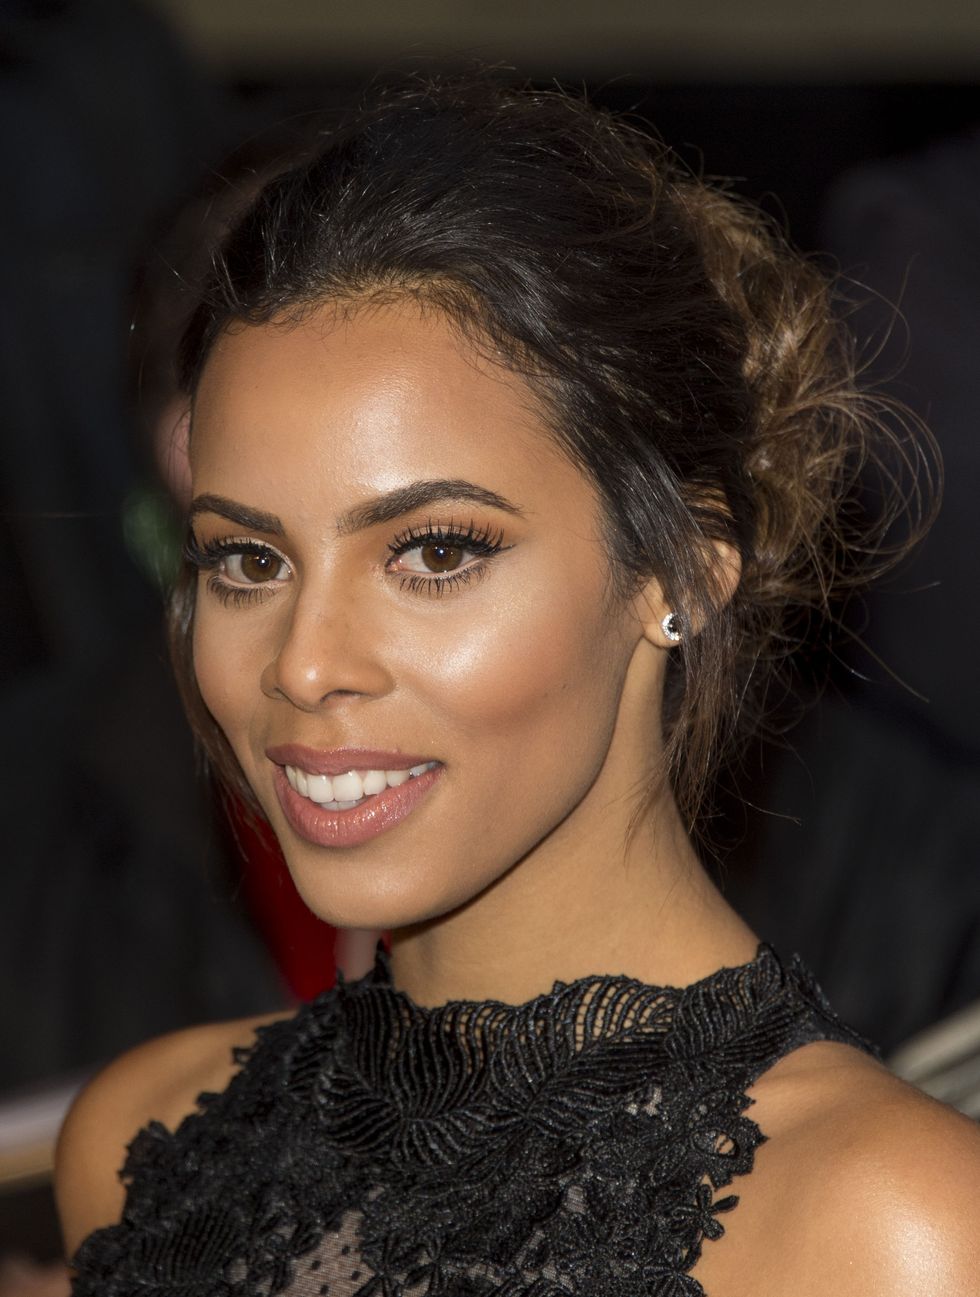 Rochelle Humes at the Pride of Britain awards 2014 - best celebrity beauty looks - Cosmopolitan.co.uk